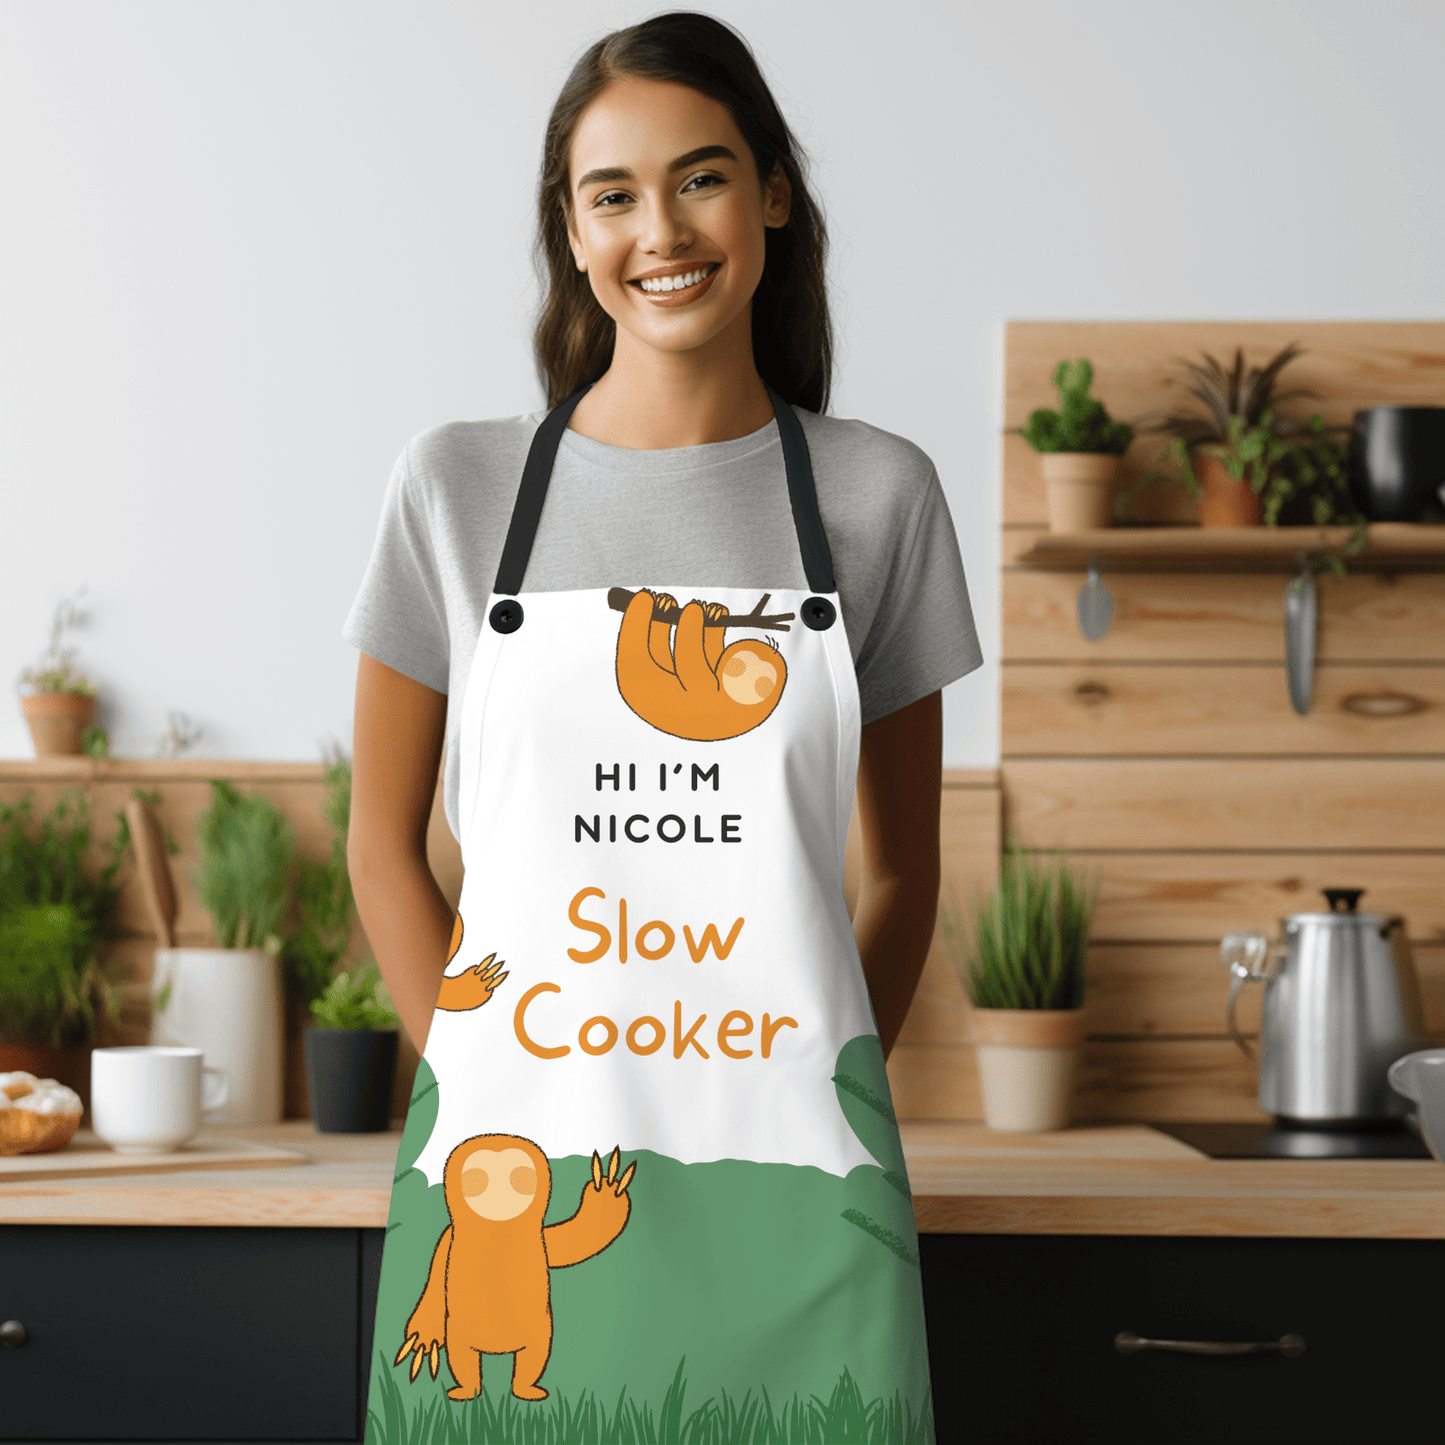 Apron for women as gift with slow cooker design